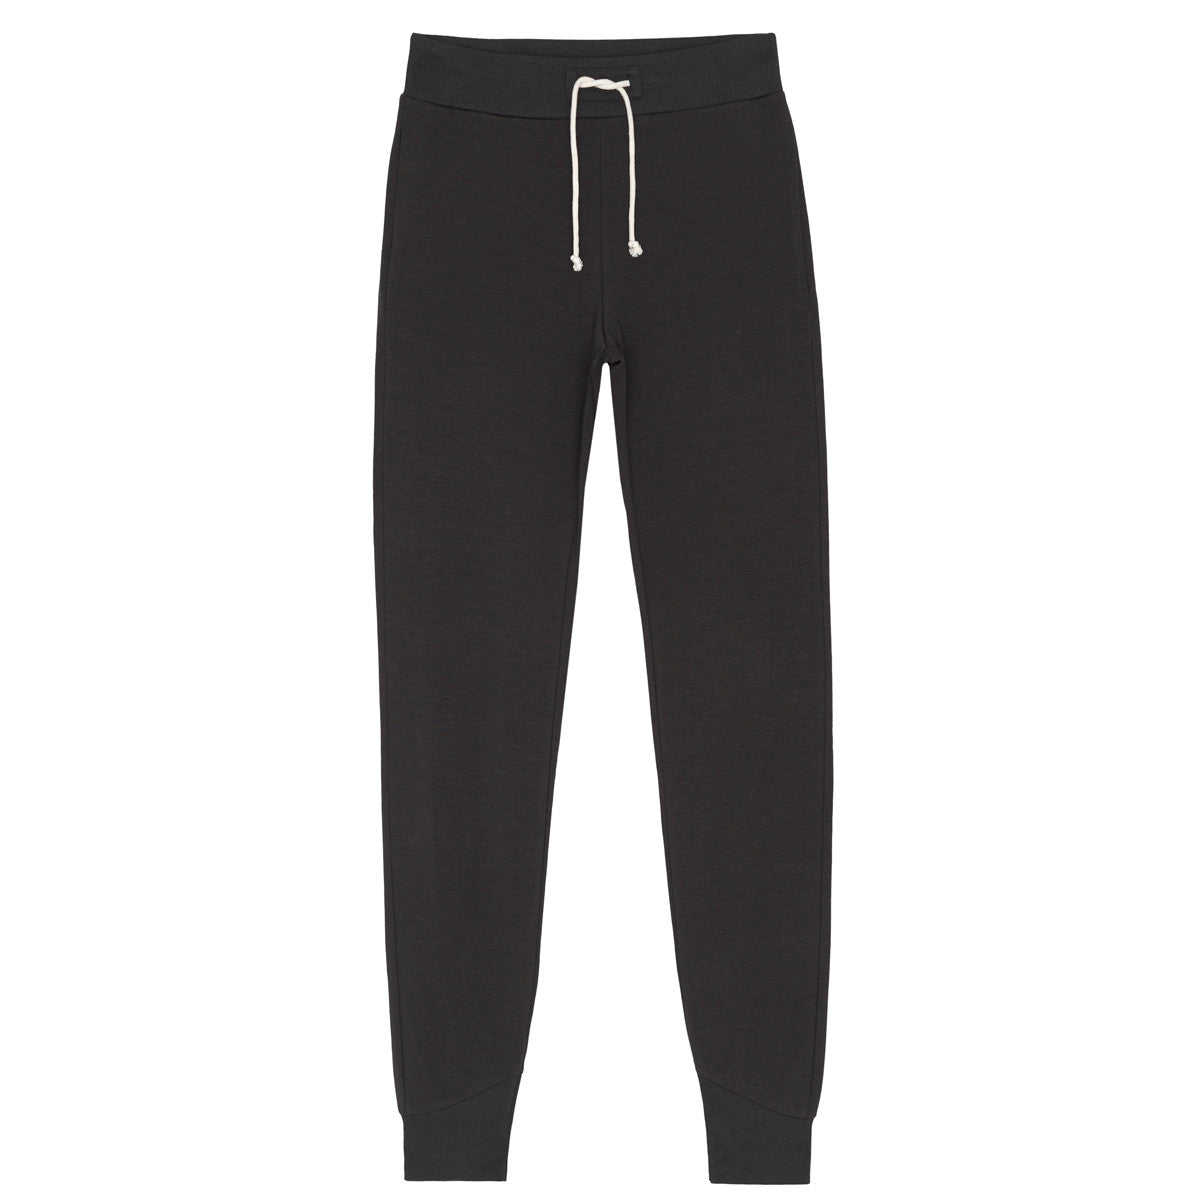 These Little Hedonist pirate black skinny tapered sweatpants are created with a curved design line at the ankle. A ribbed cuff is set underneath. These pants offer an elasticated waist finished with a drawstring. Inset pockets at the front are combined with a single welt pocket at the back. Extremely soft to wear.